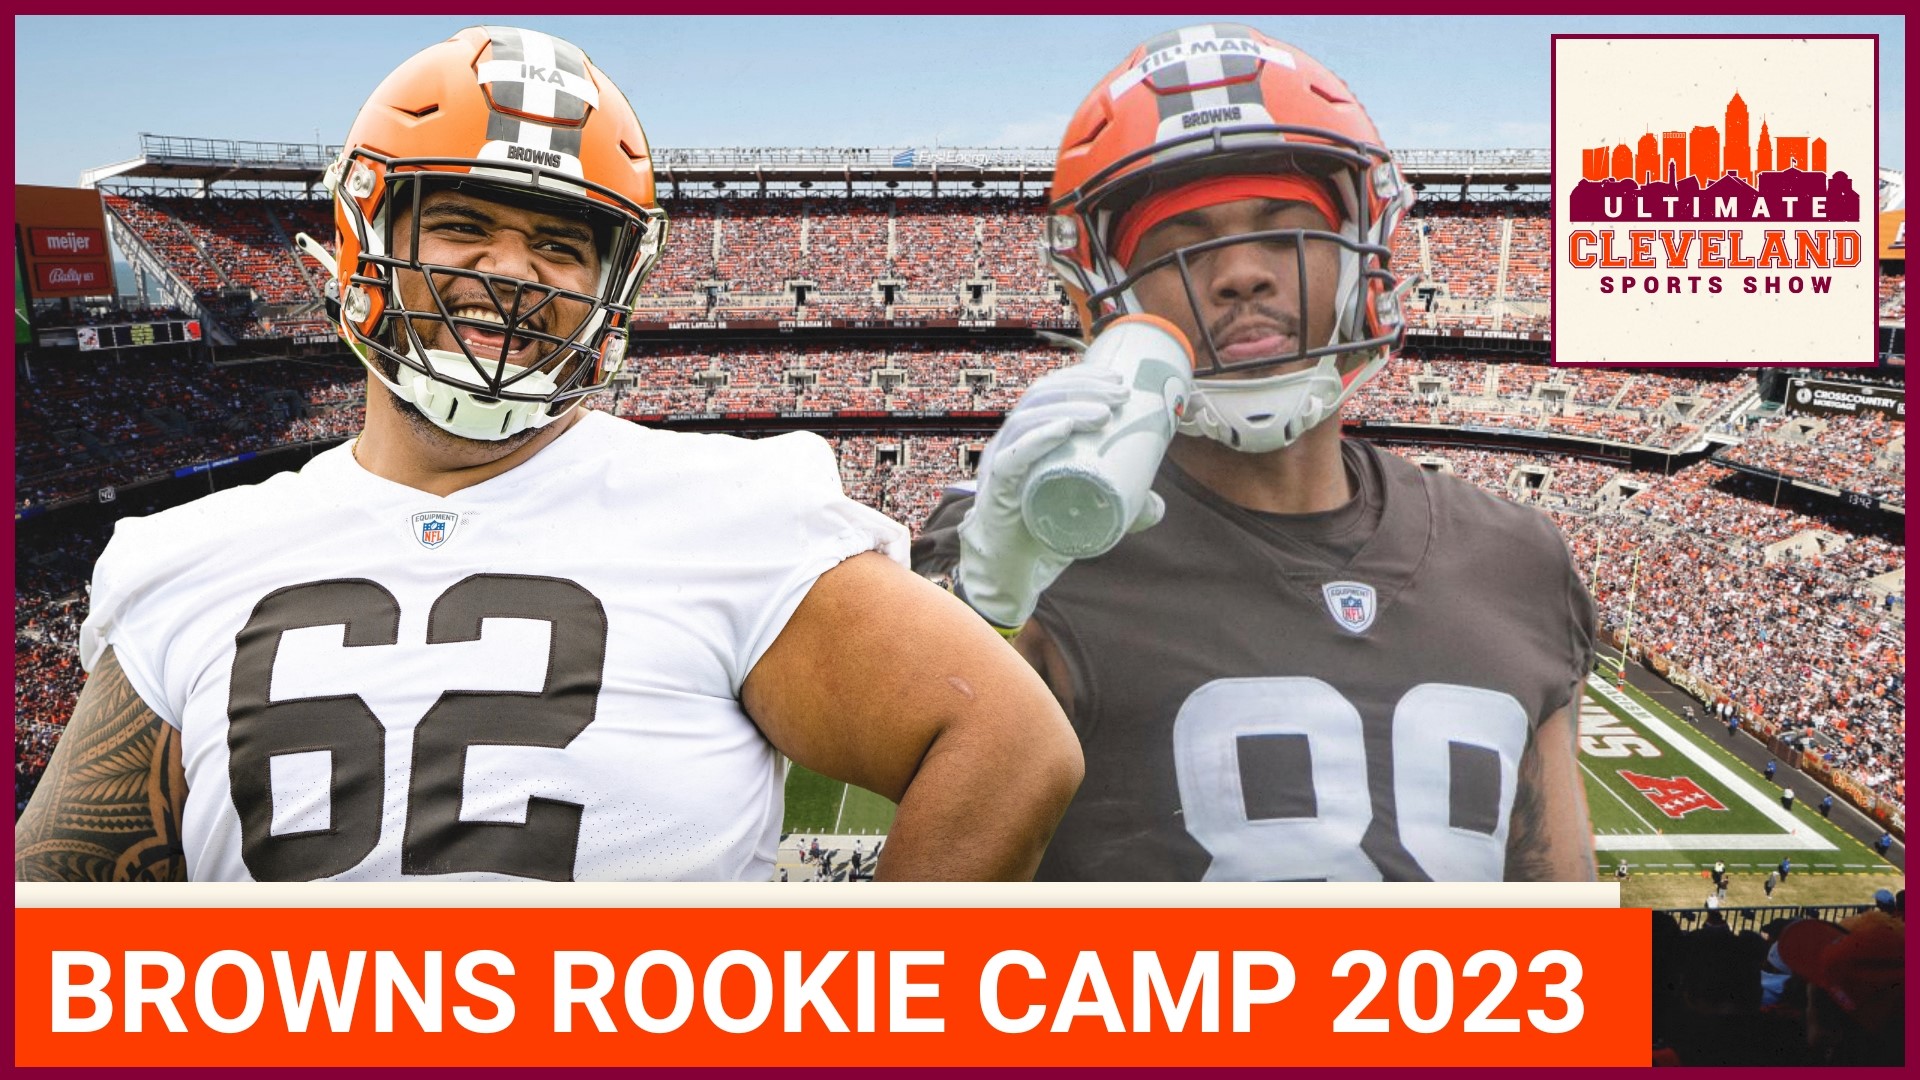 Cleveland Browns Rookie Camp, Who to look out for in 2023, Mary Kay Cabot